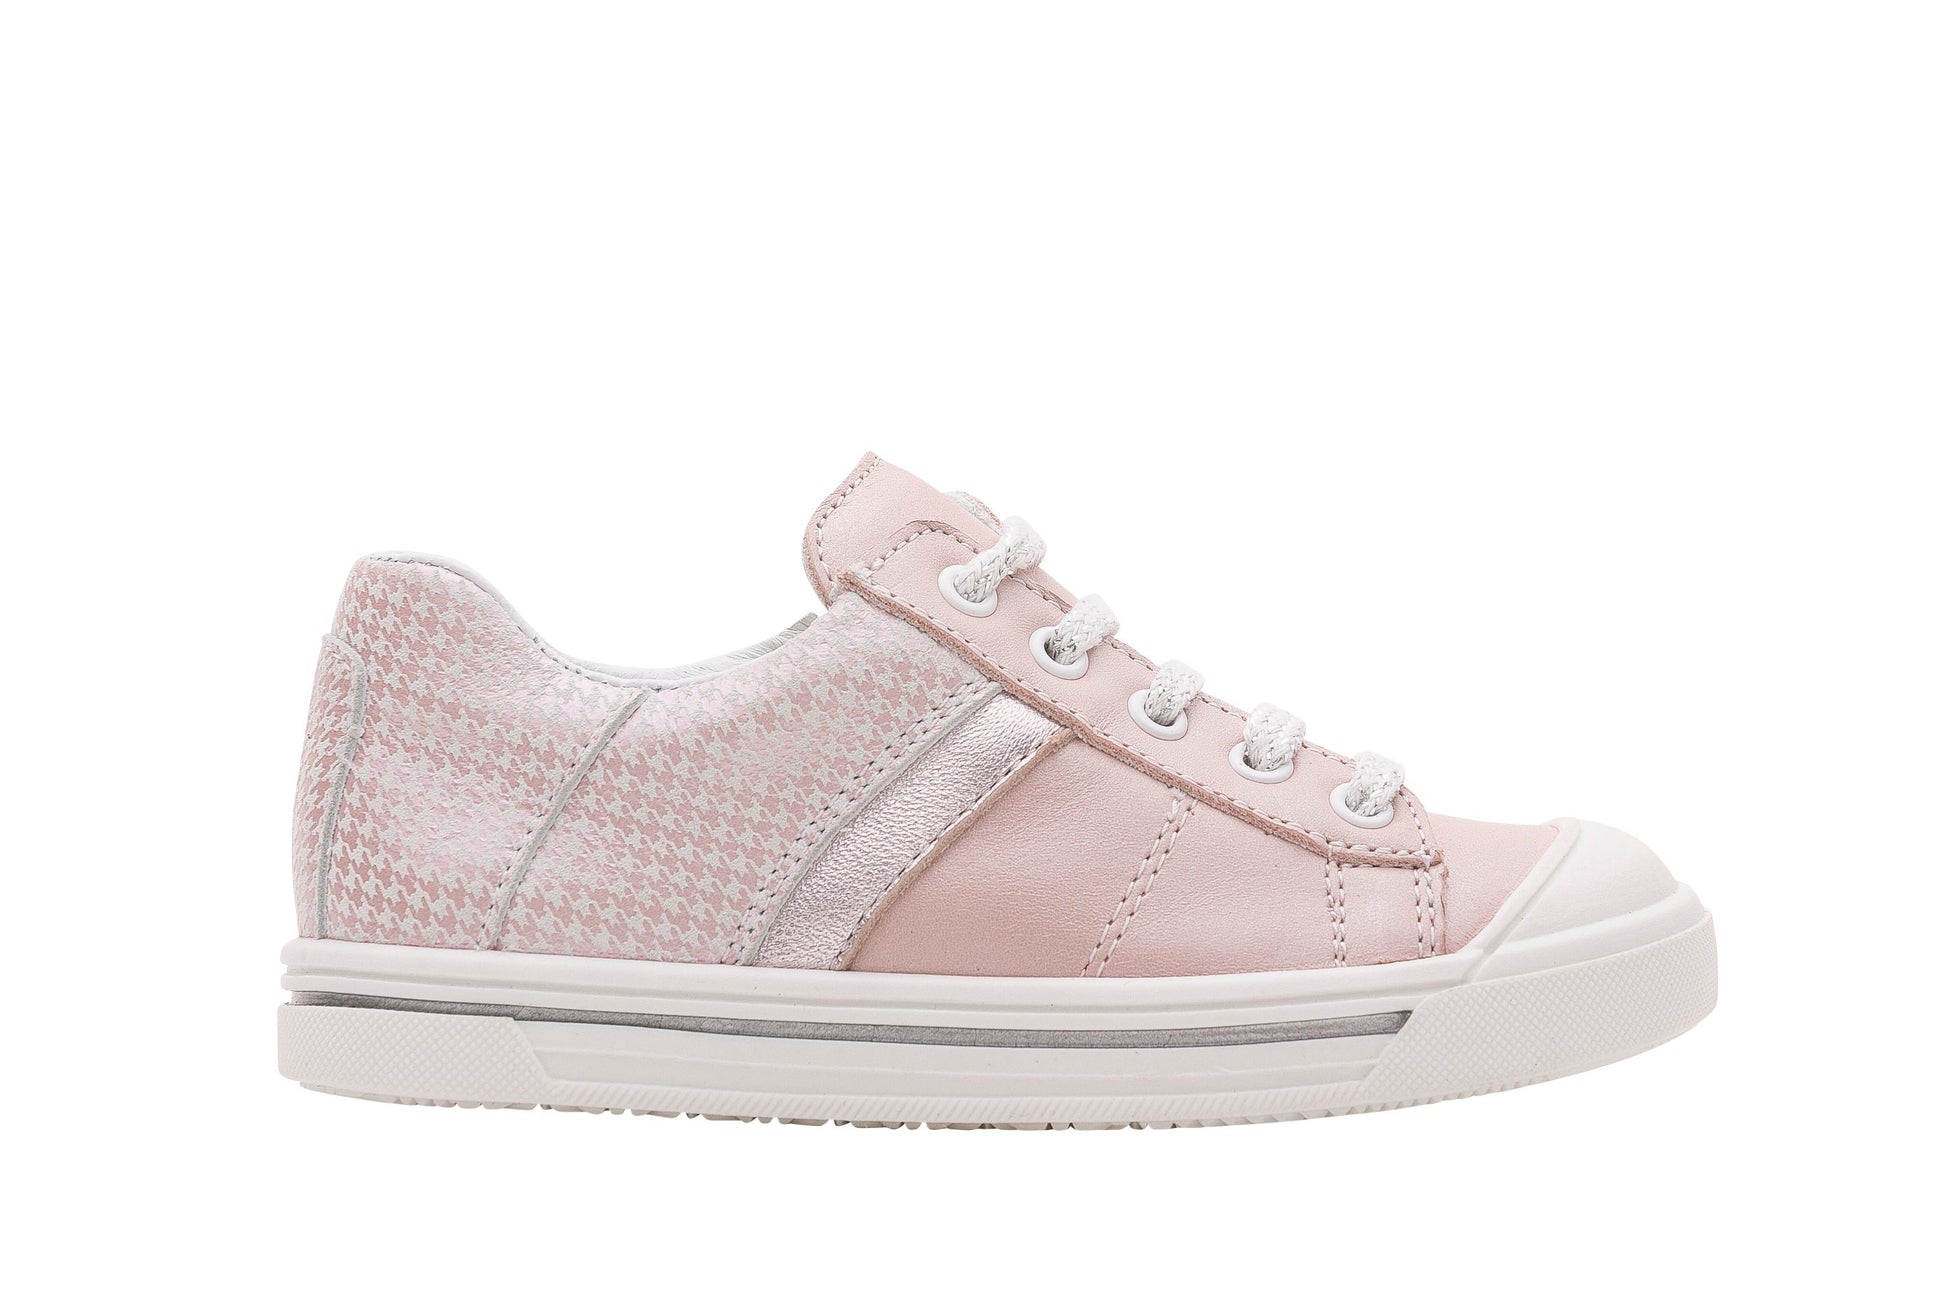 A girls casual trainer by Bopy, style Scoobi, in pink with lace up and zip fastening. Left side view.